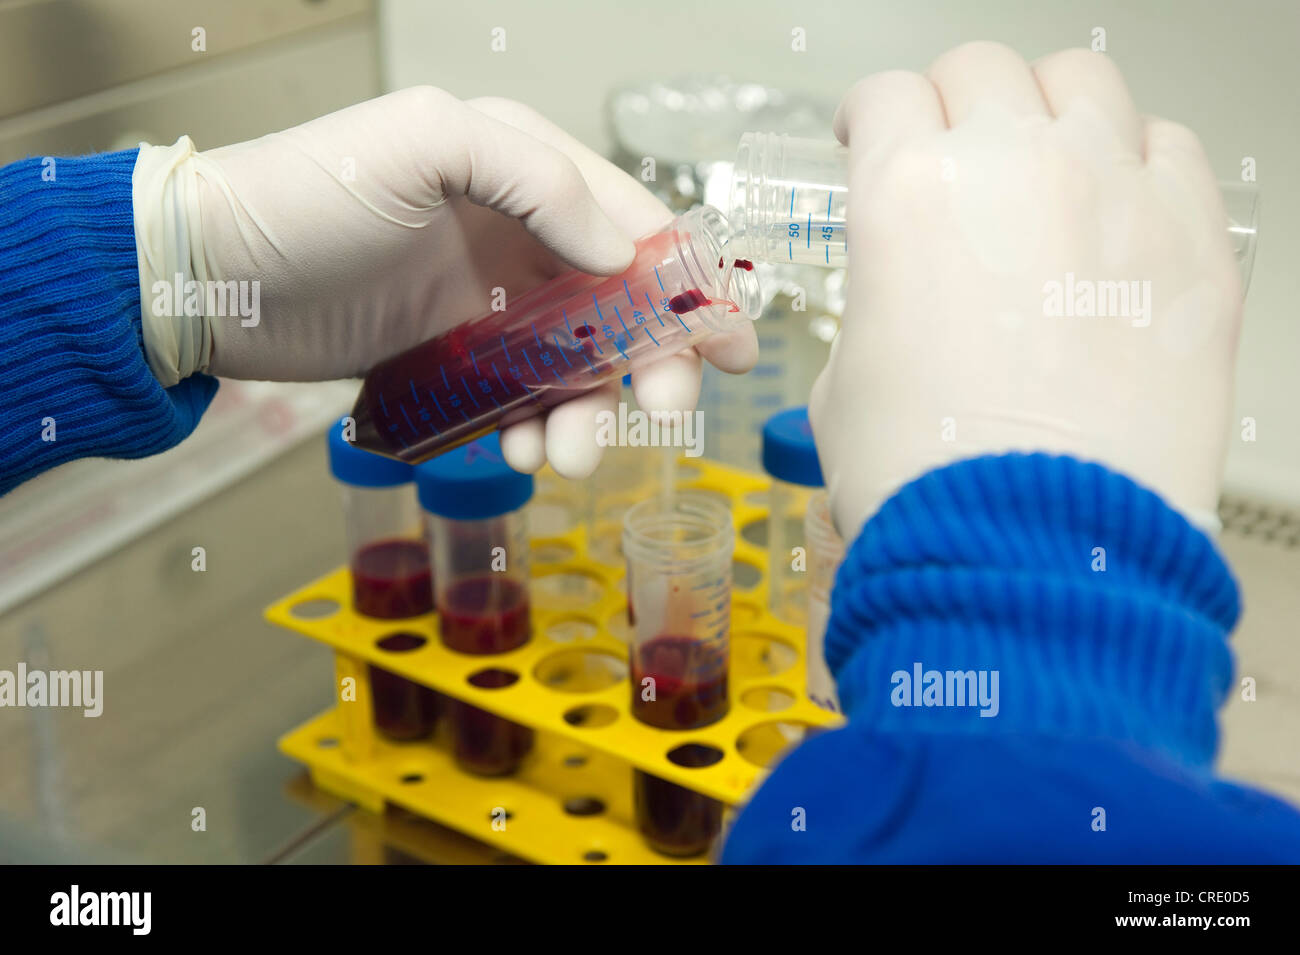 Treatment of a patient's blood in a sterile bench, Institute for Medical Microbiology, Immunology and Hygiene Stock Photo